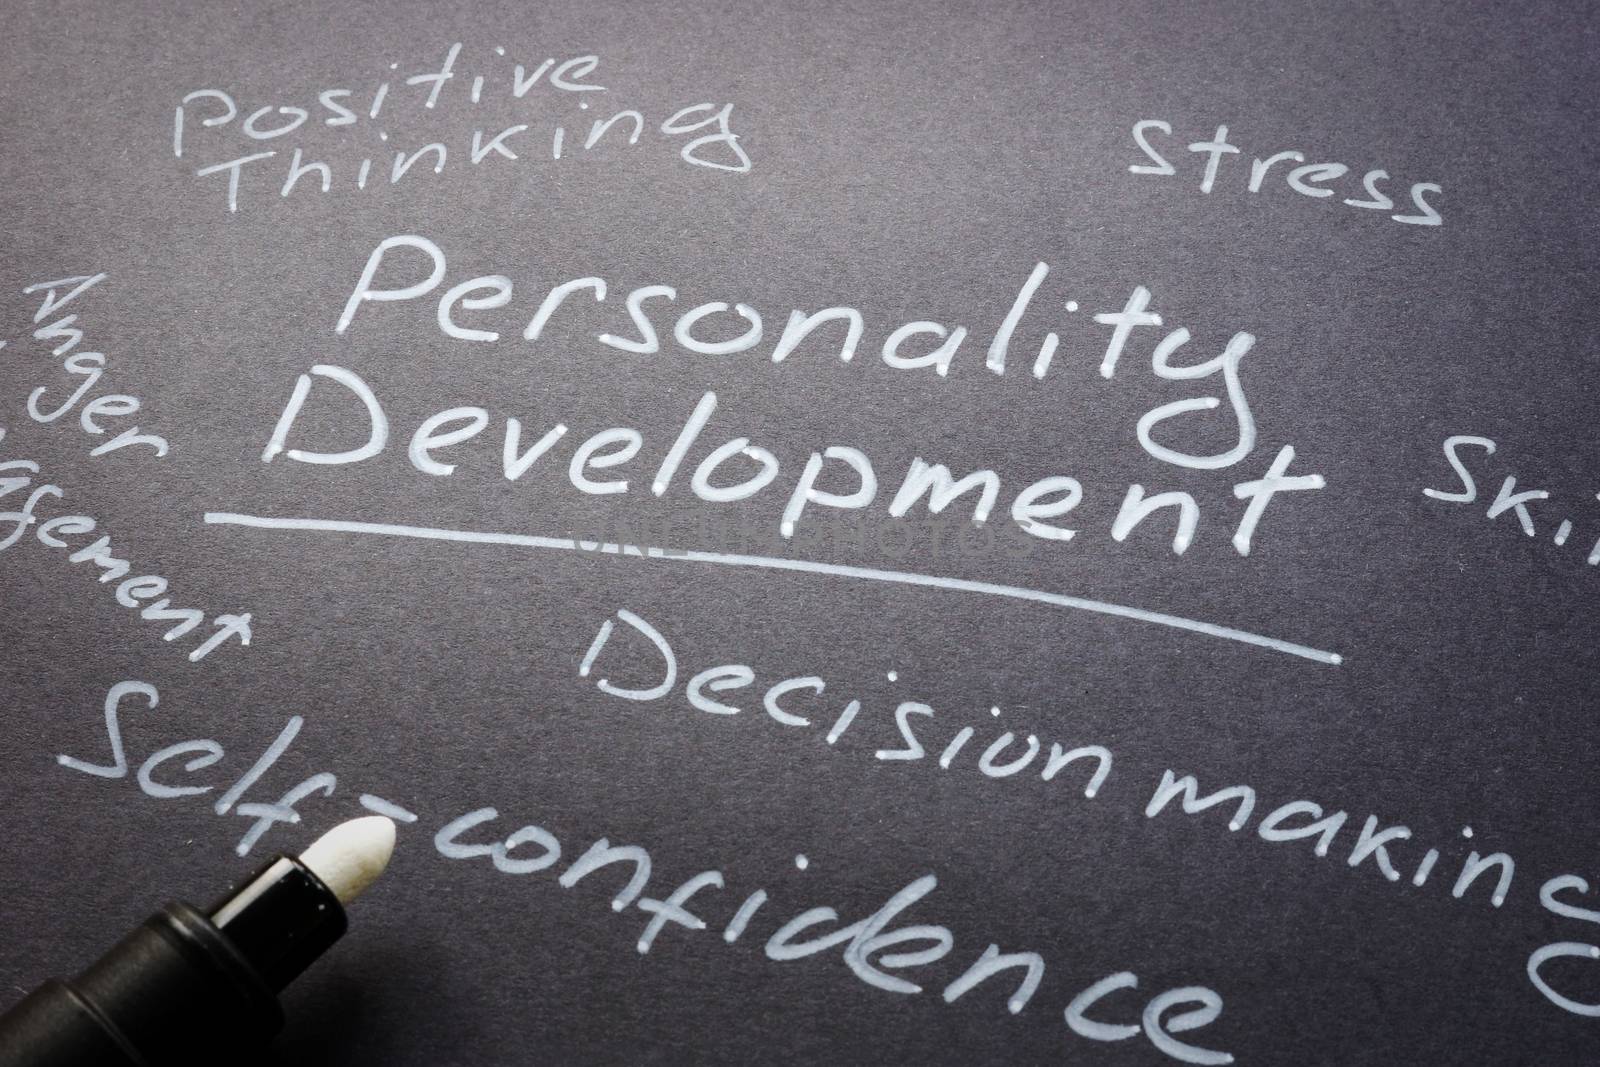 Personality Development and other signs on the paper. by designer491